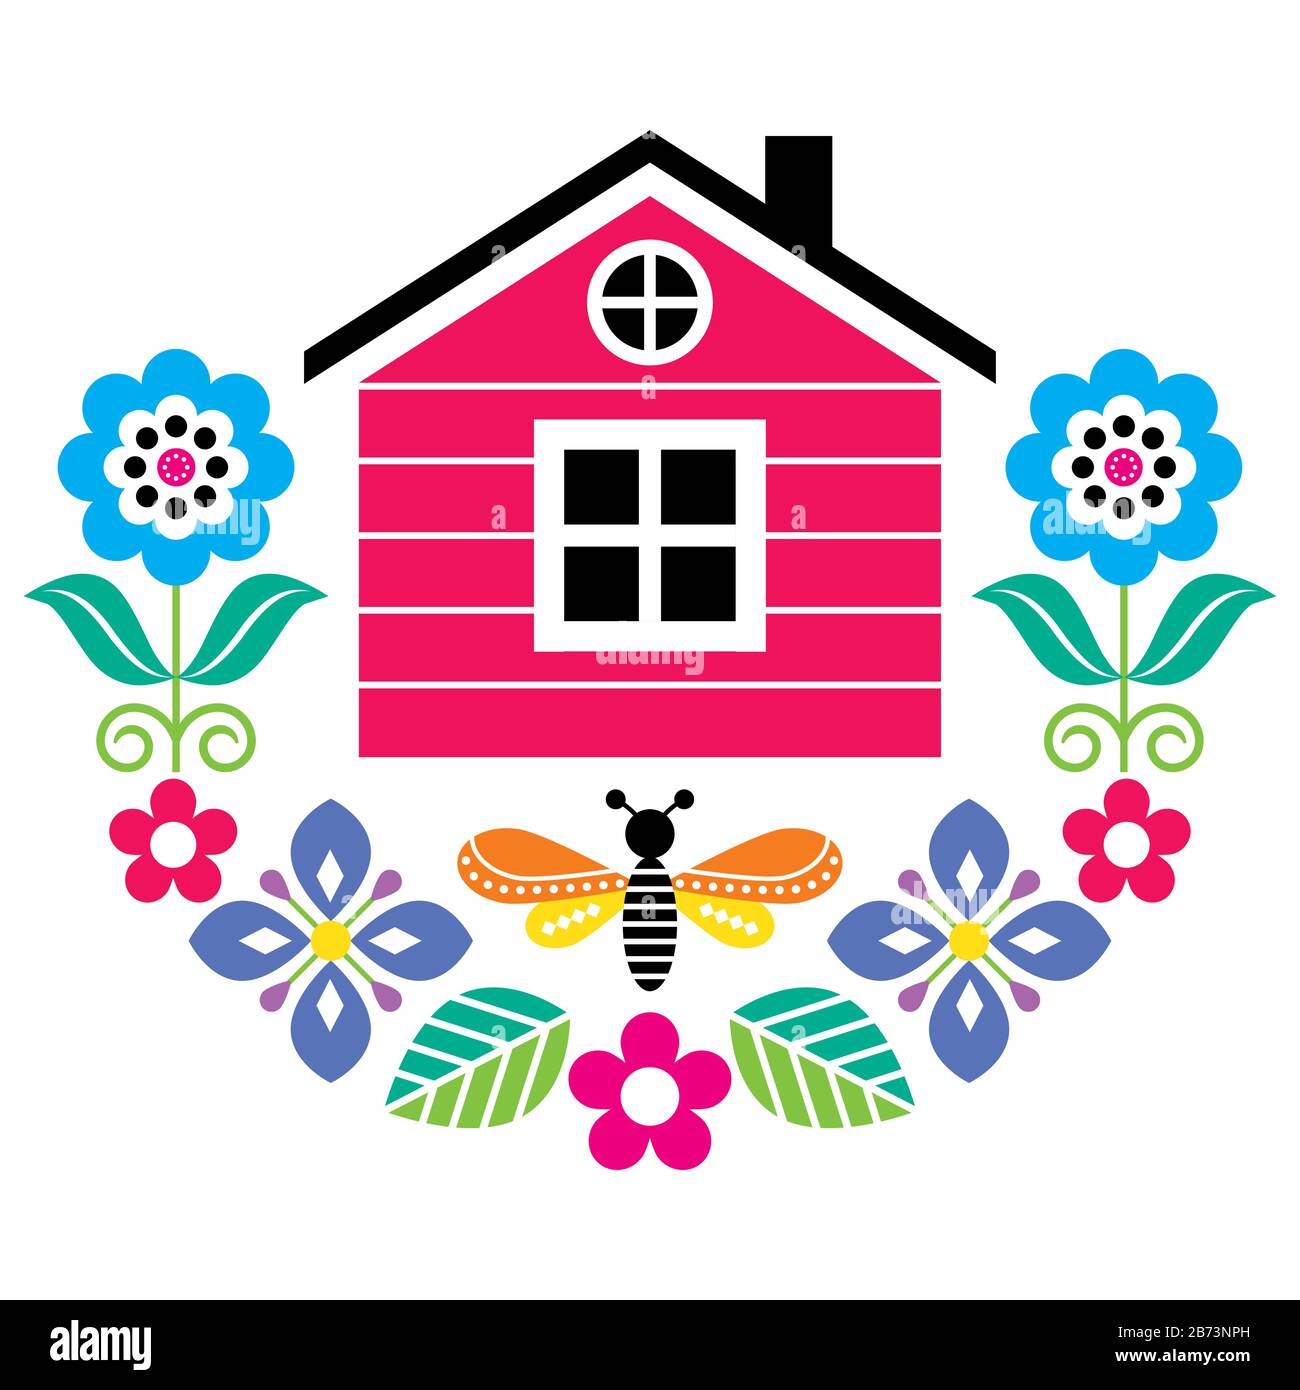 Scandinavian folk art vector cute floral pattern with Finnish or Norwegian house, greeting card with flowers in red, pink, green, and blue Stock Vector